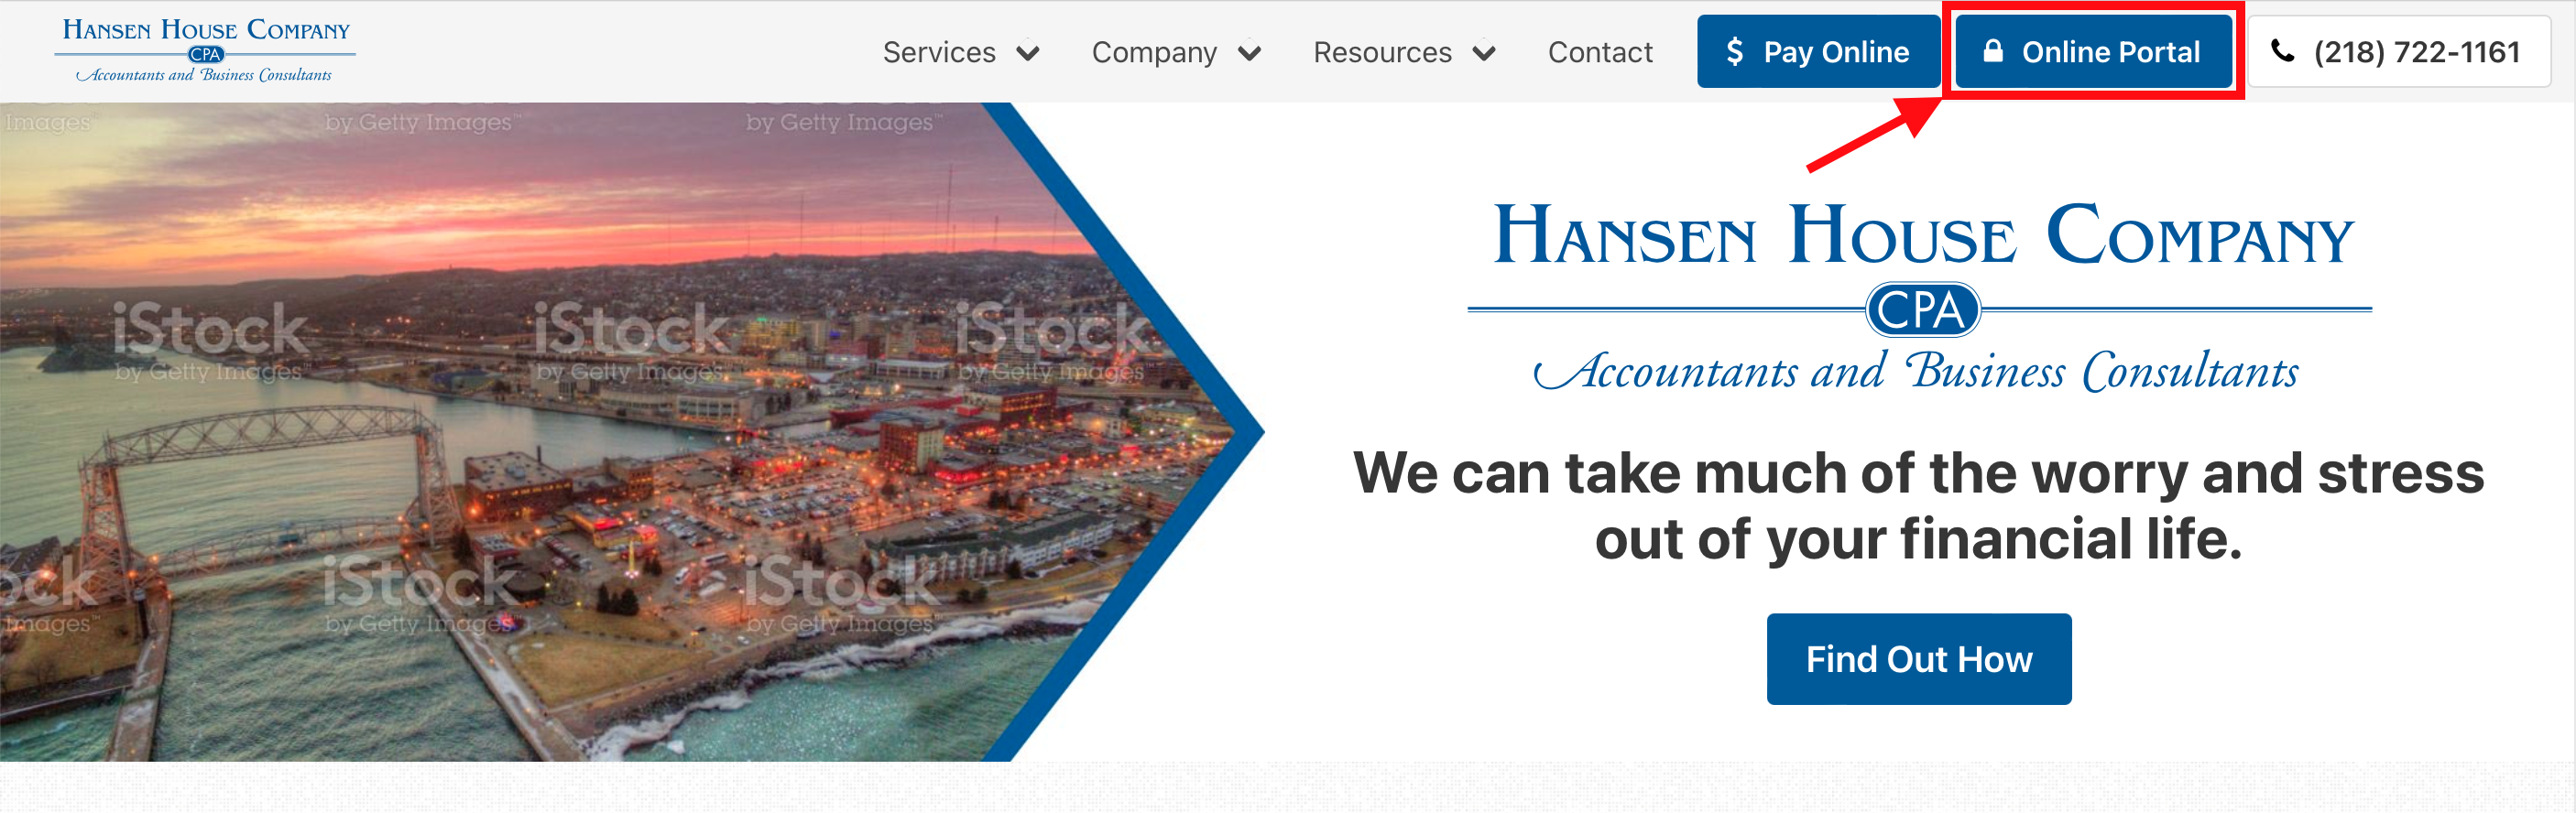 Step-by-step guide illustration for accessing the Hansen House Company online client portal.